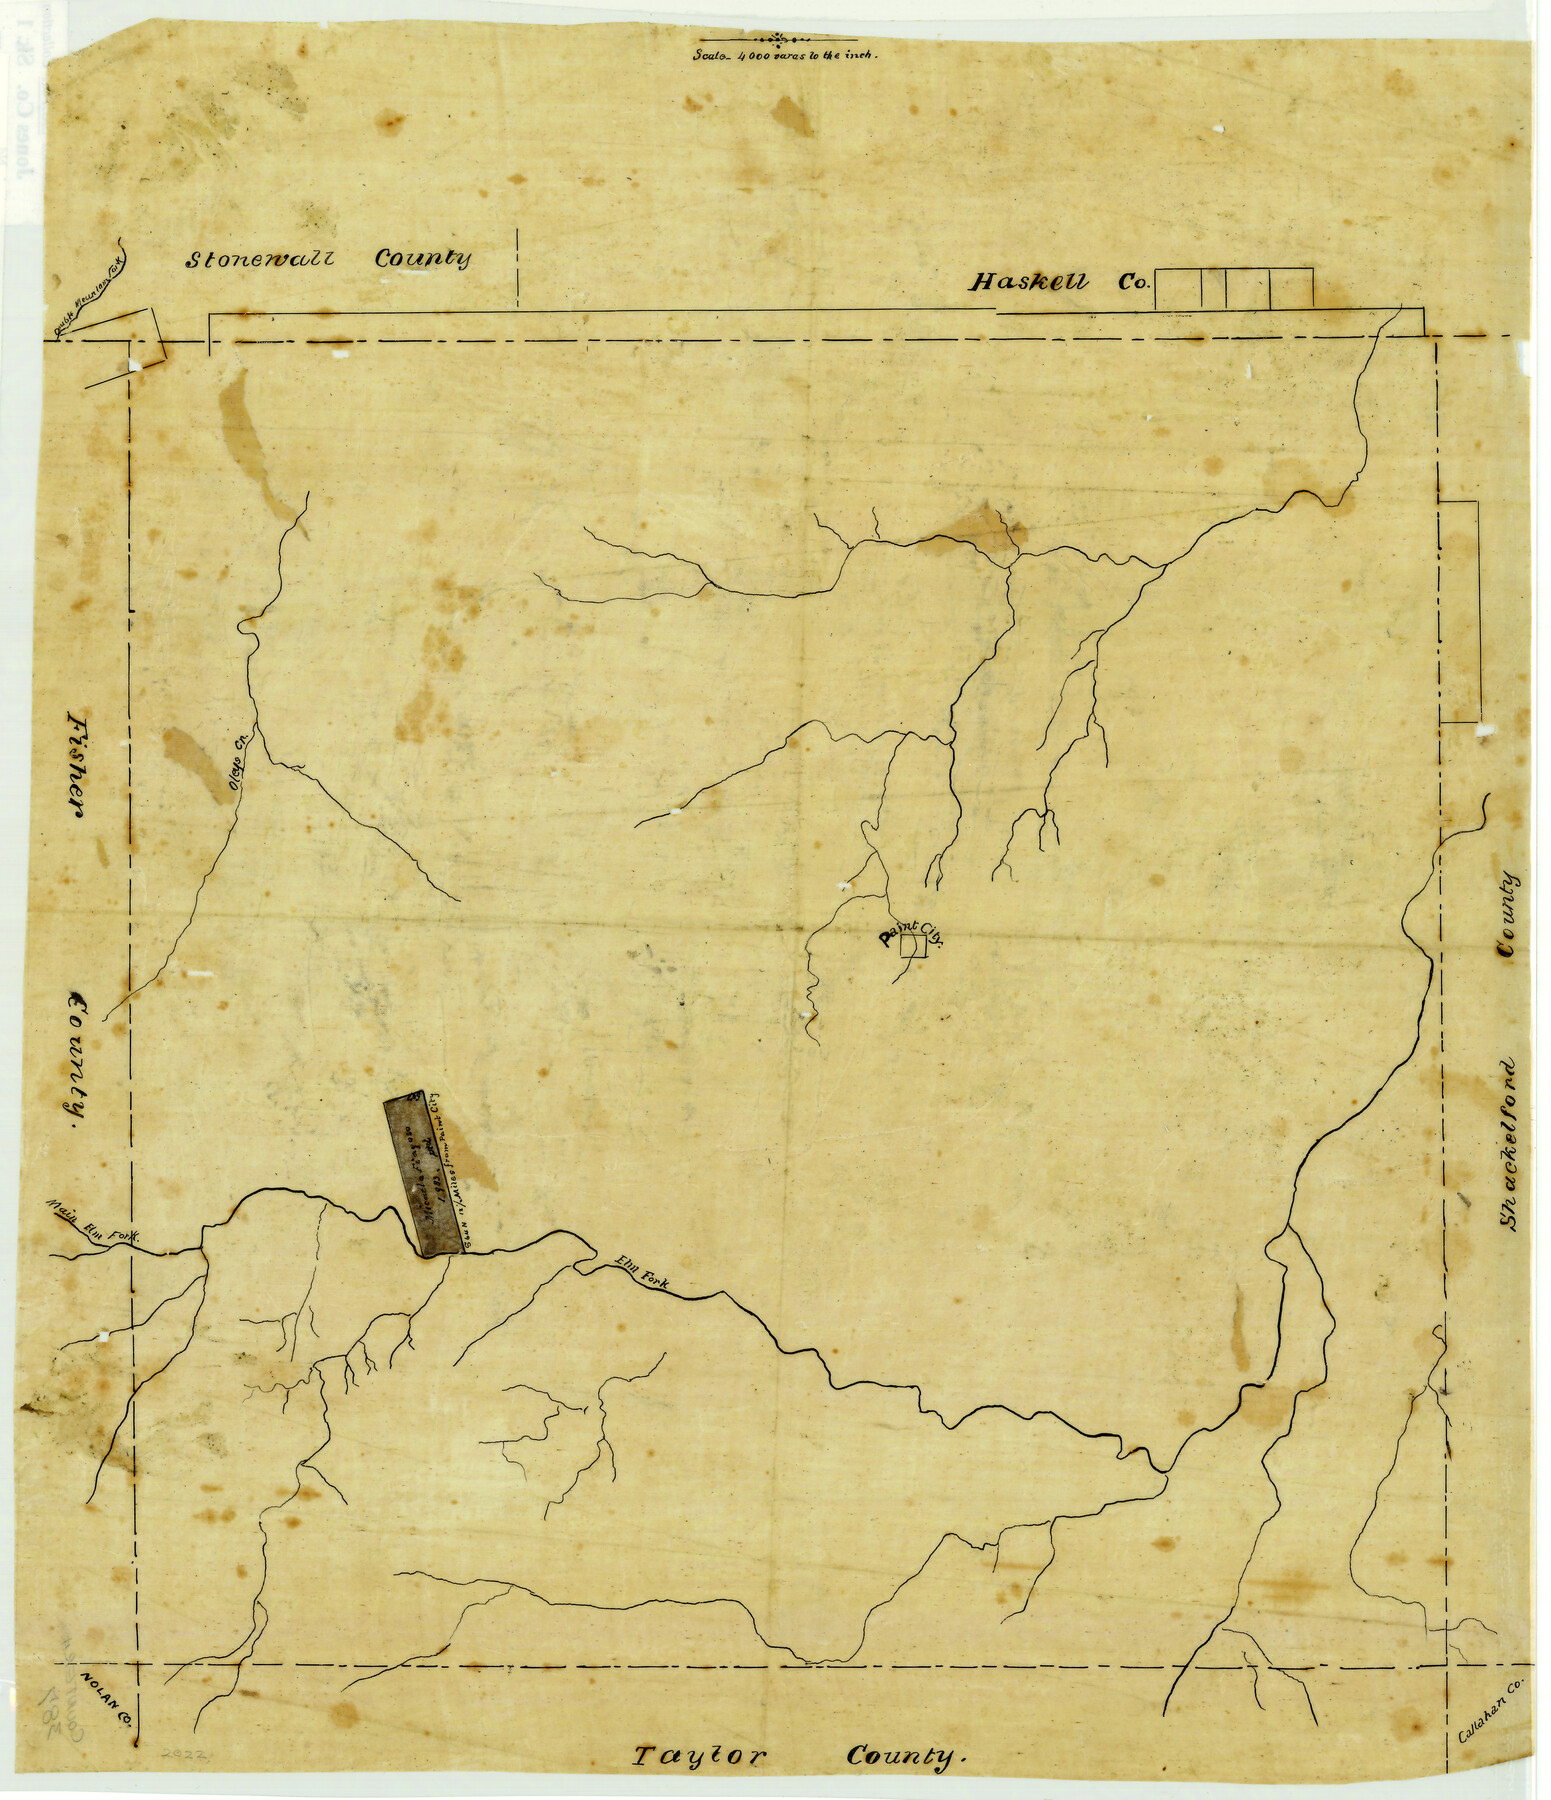 387, [Surveying sketch of Jones County showing Micaela Fiagoso survey], Maddox Collection